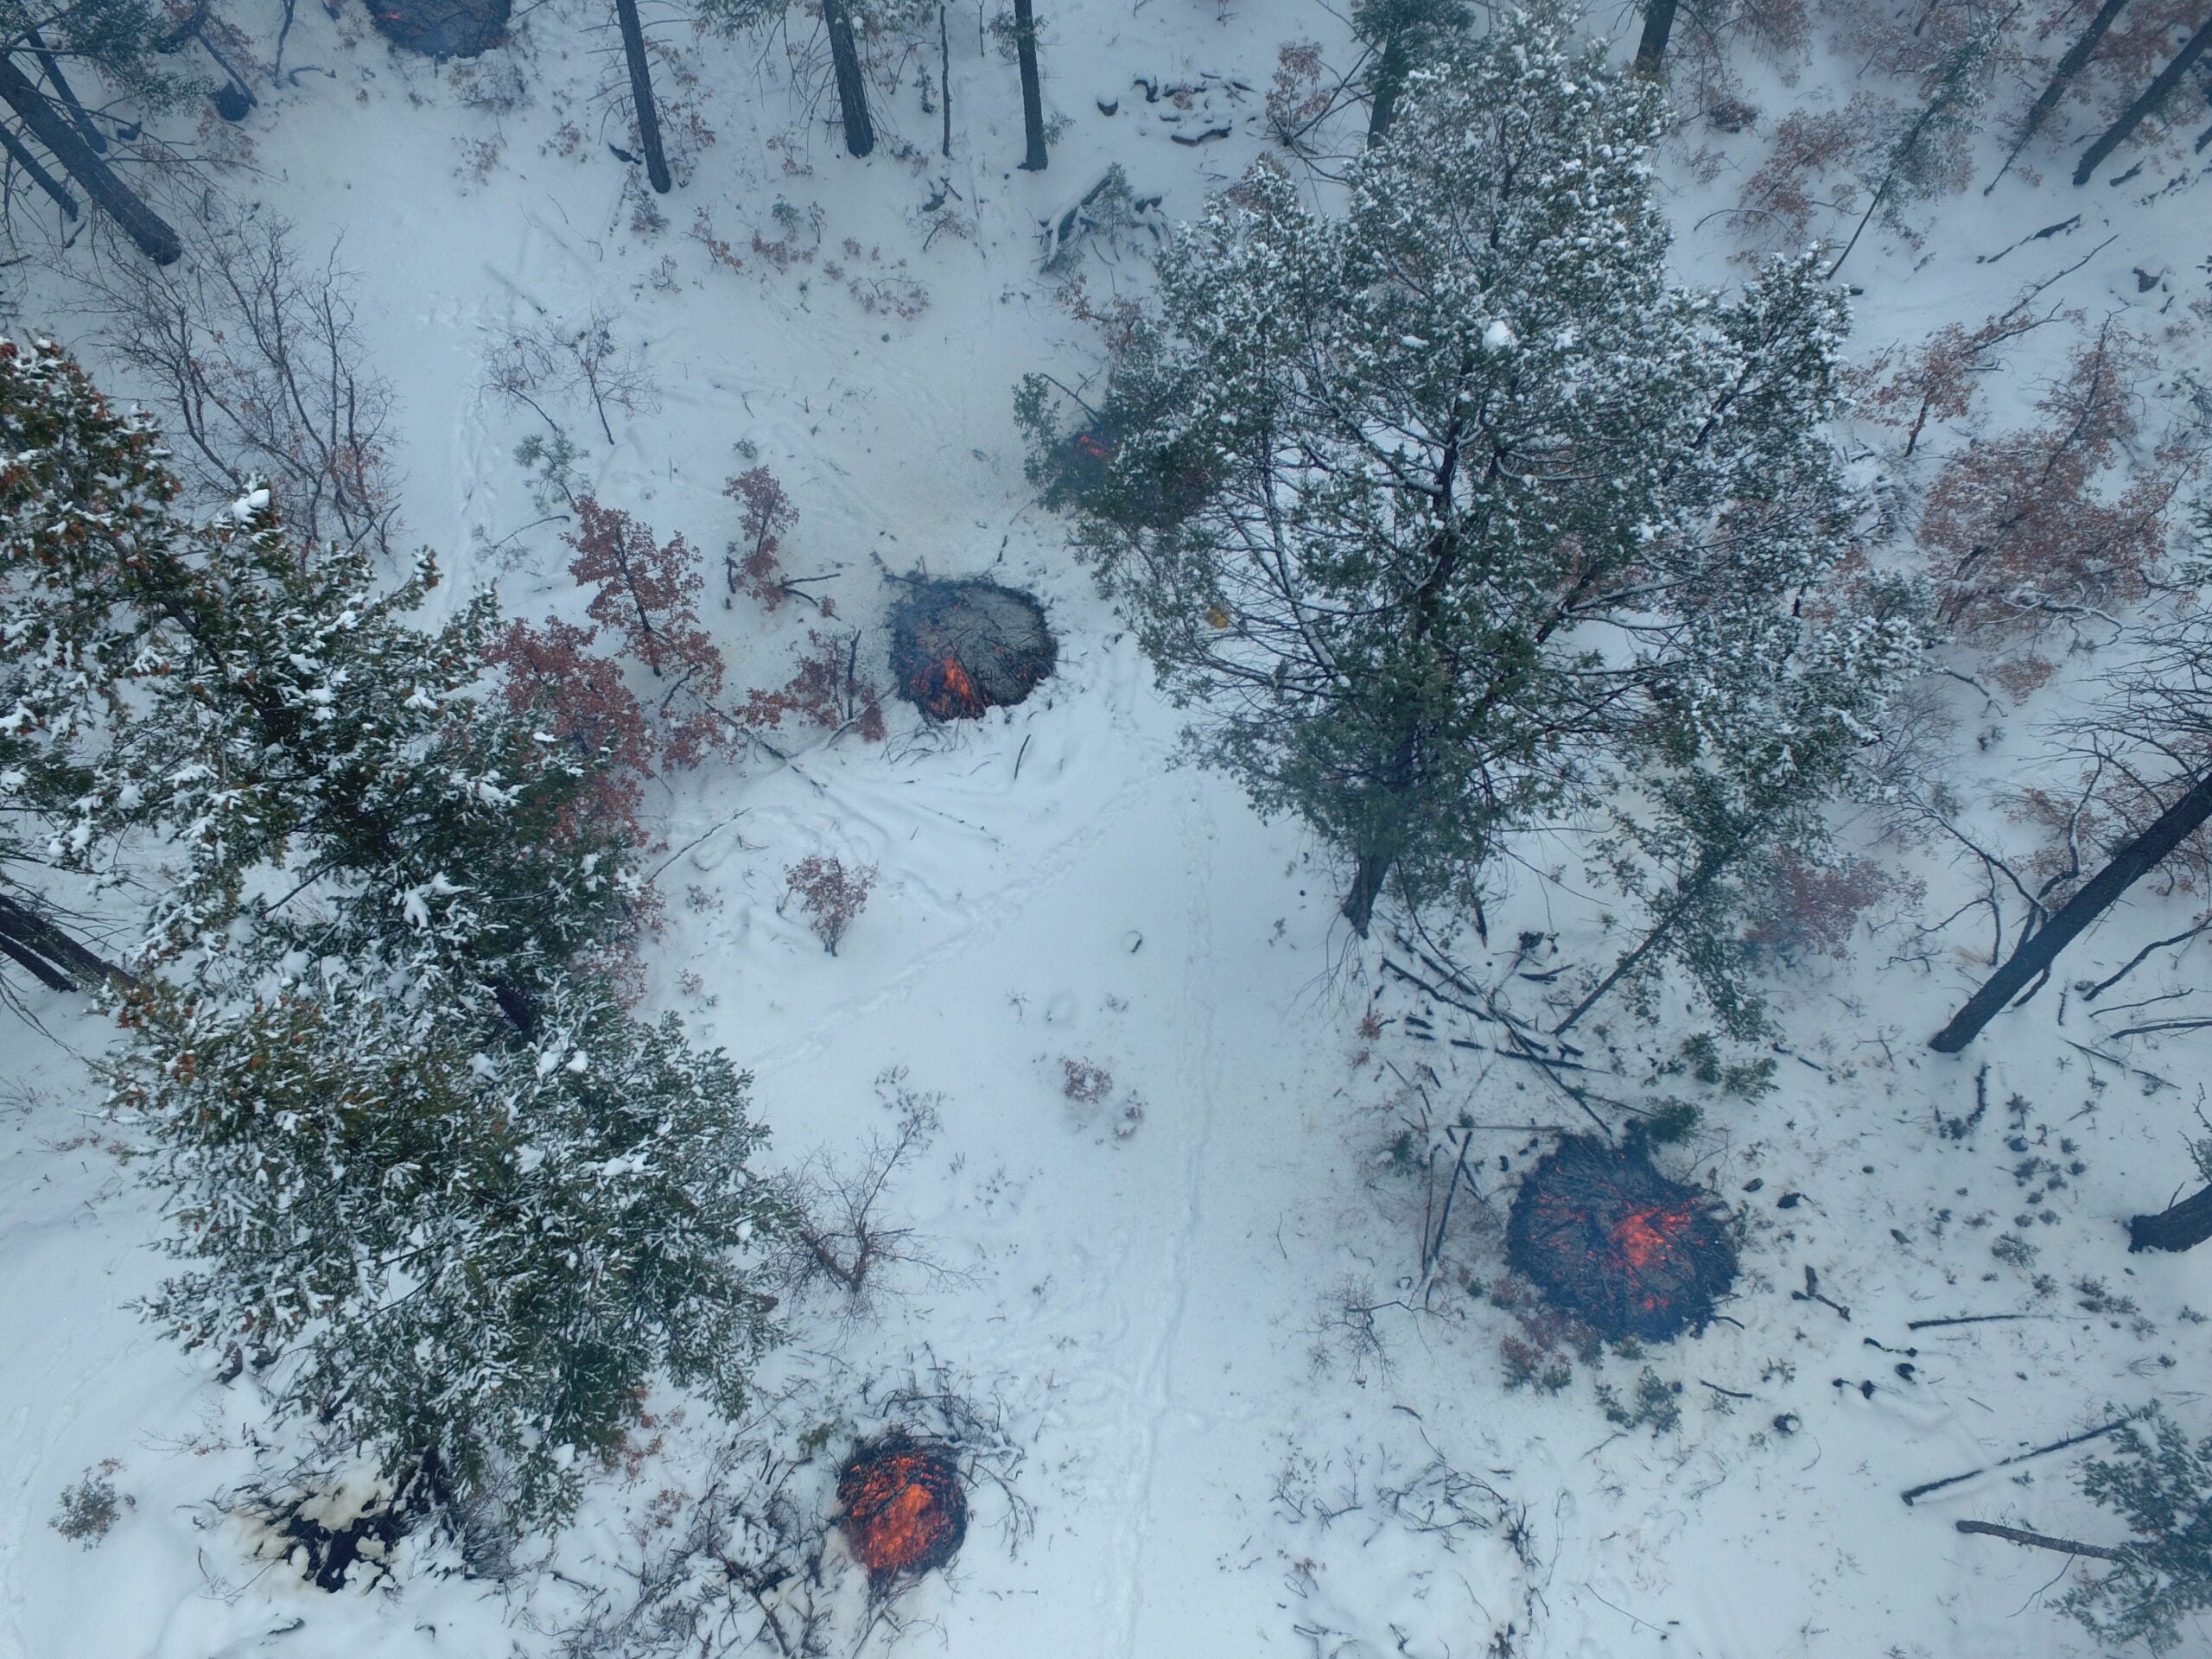 Piles of ash on snow after prescribe burns in the Santa Fe National Forest